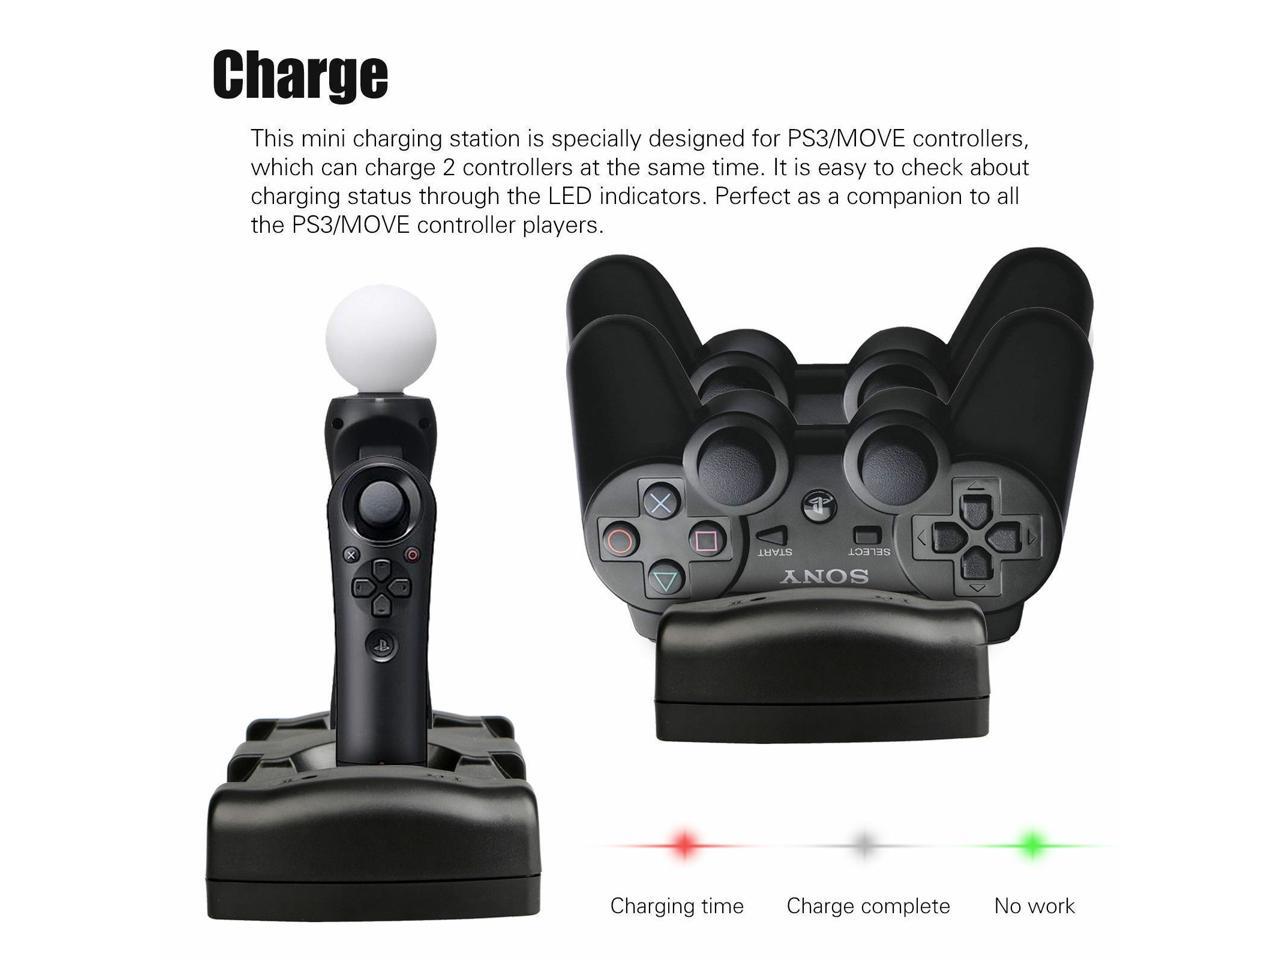 Hubb Accessories USB Move Dual Charger Dock PS3 Playstation 3 